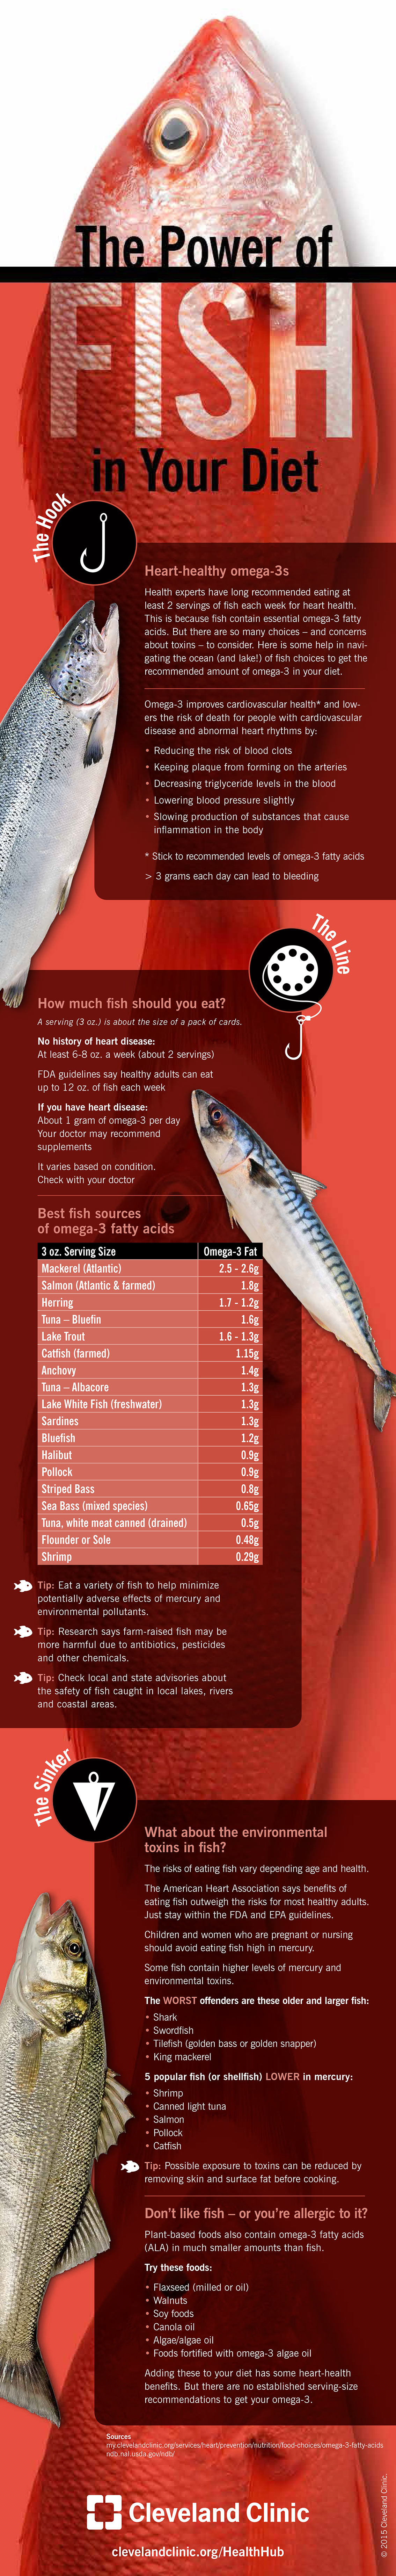 Power of Fish in Your Diet - Health Nutrition Infographic